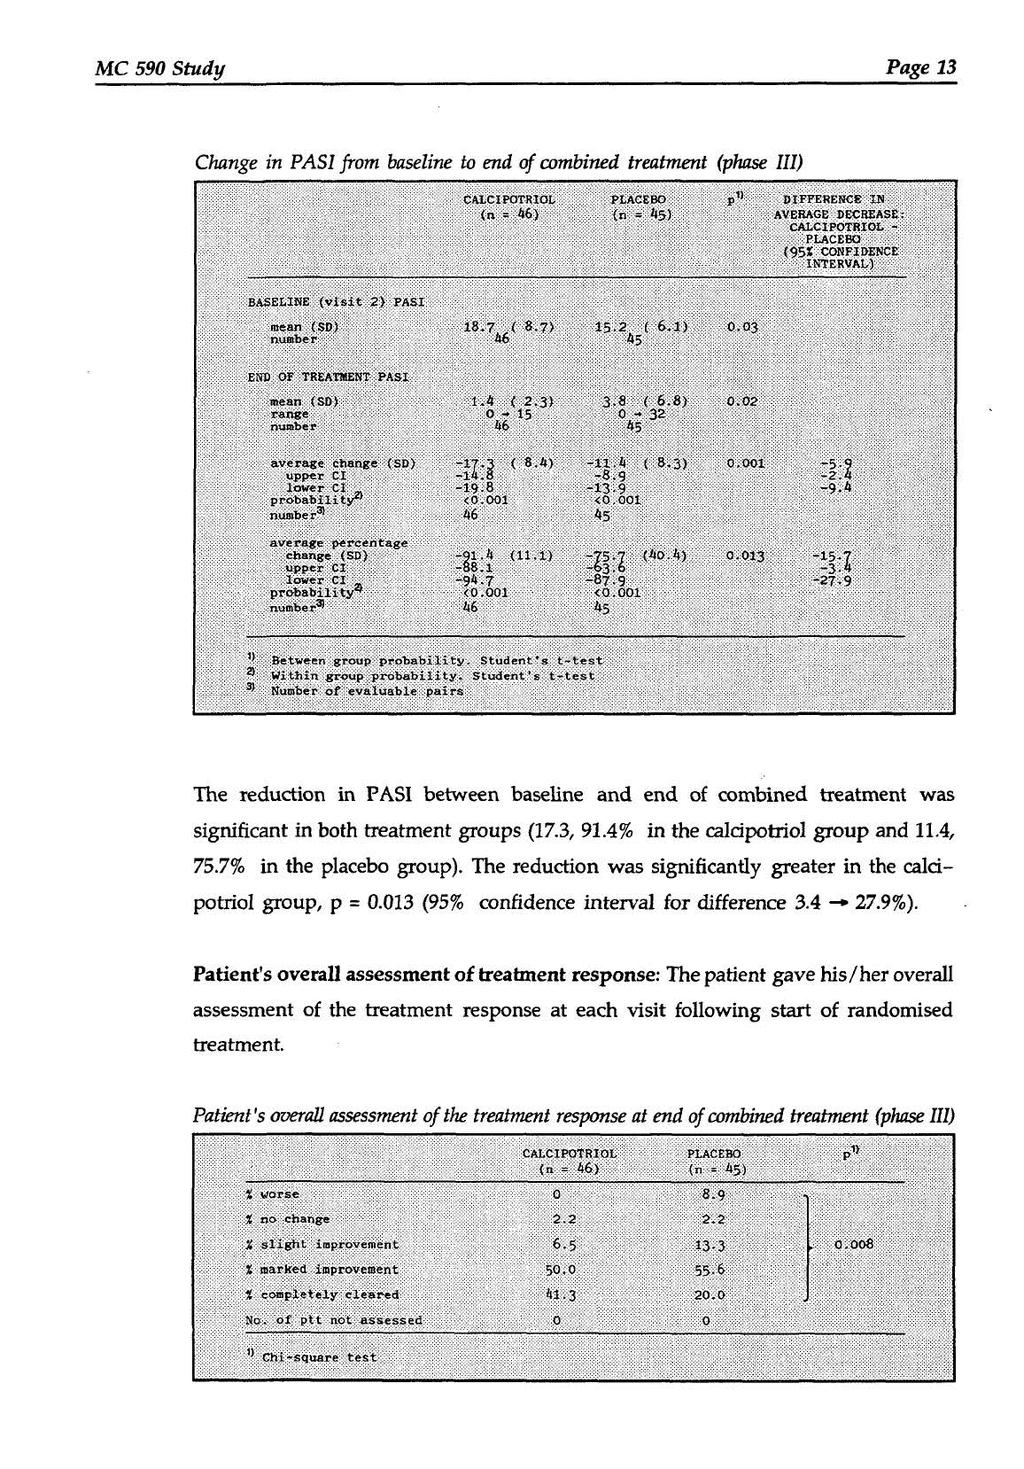 MC 590 Study Page 13 Change in PASI from baseline to end of combined treatment (phase Ill) The reduction in PASI between baseline and end of combined treatment was significant in both treatment